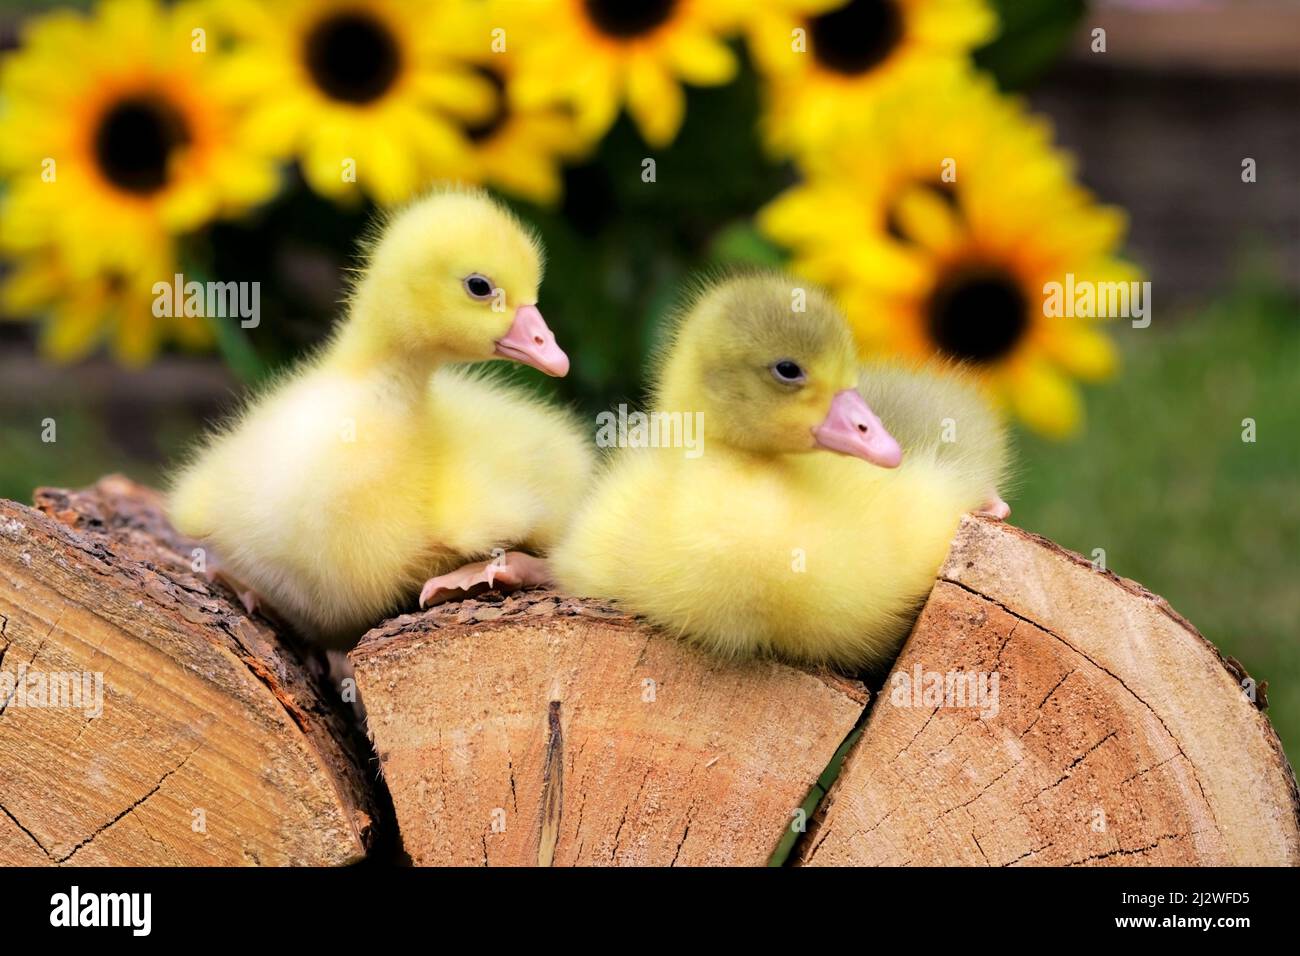 Two Baby Geese , called Gosling, resting together on wood pile, sunflowers in back Stock Photo